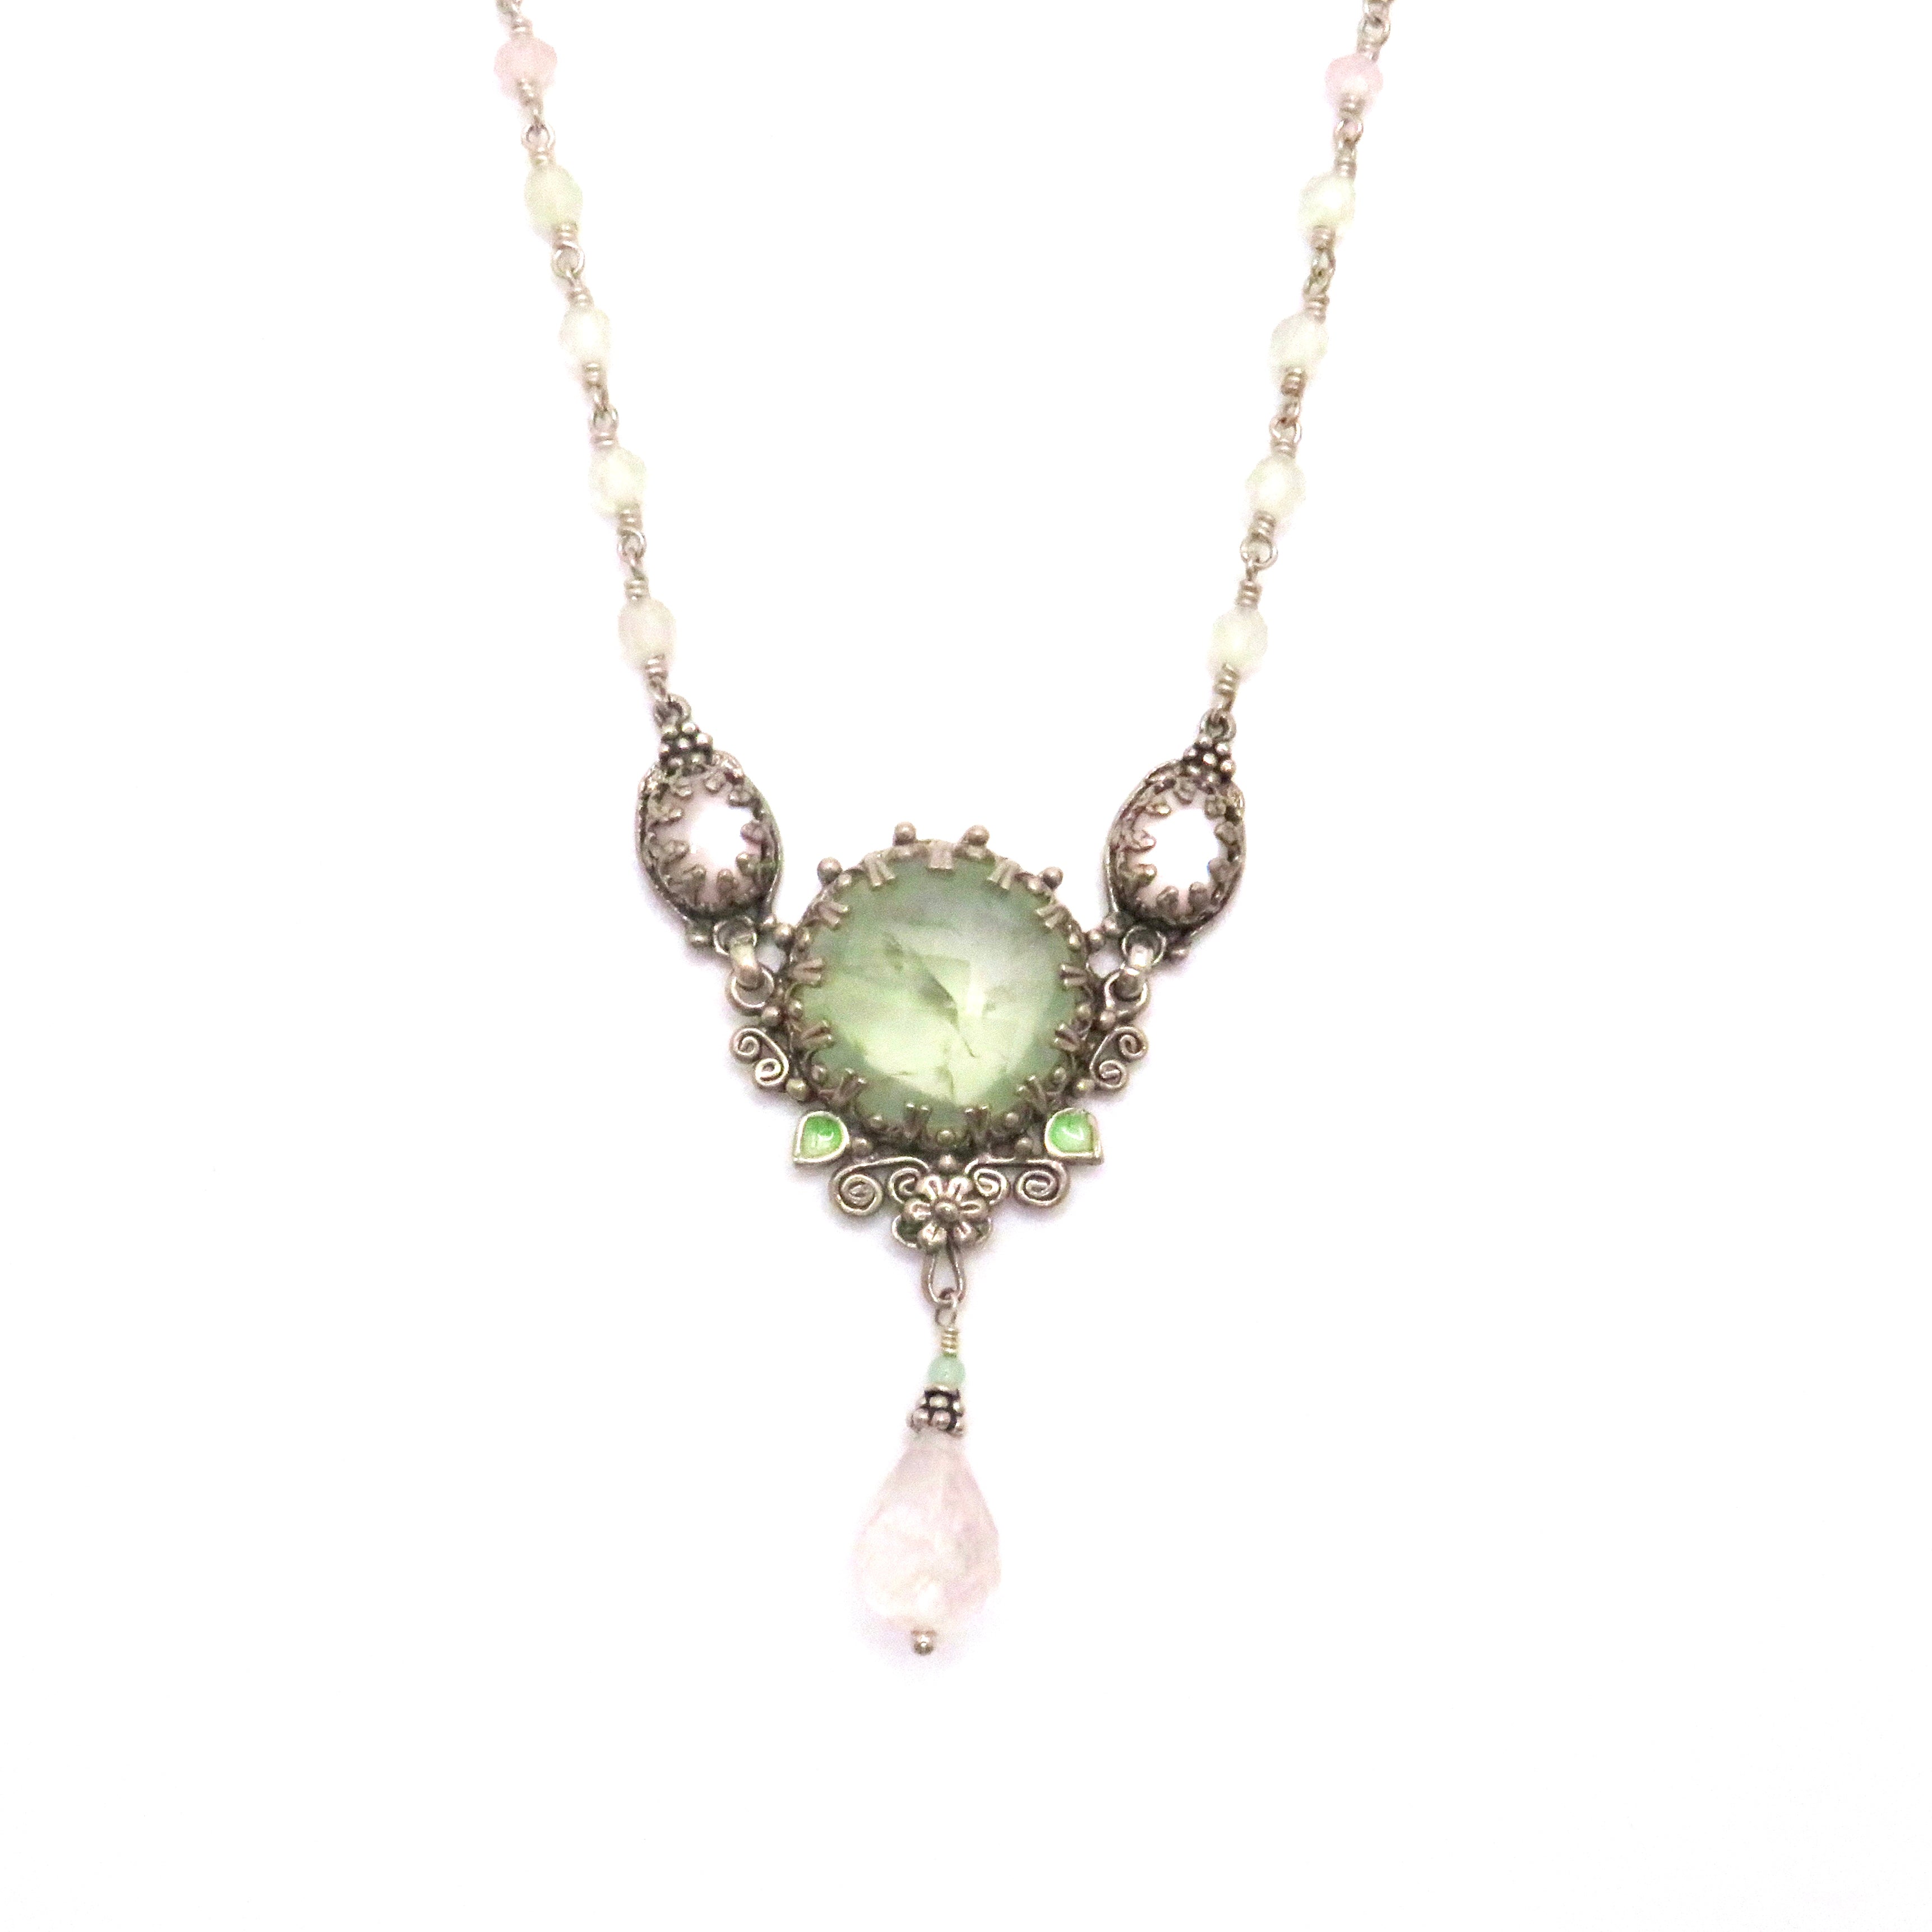 silver necklace with green gemstones and beads